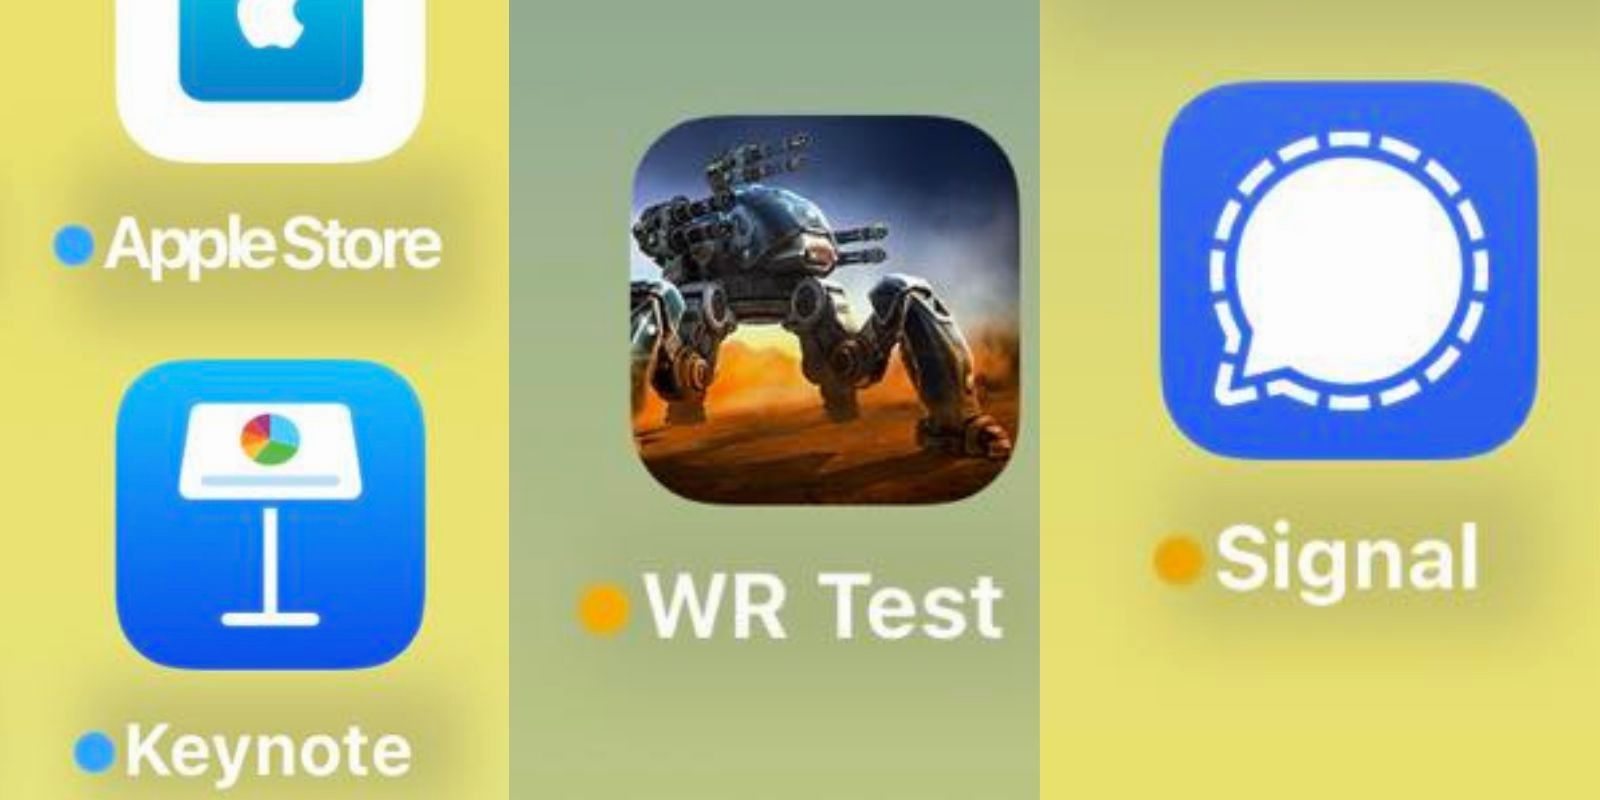 iOS Apps With Blue and Orange Dots Right Beside Their Names